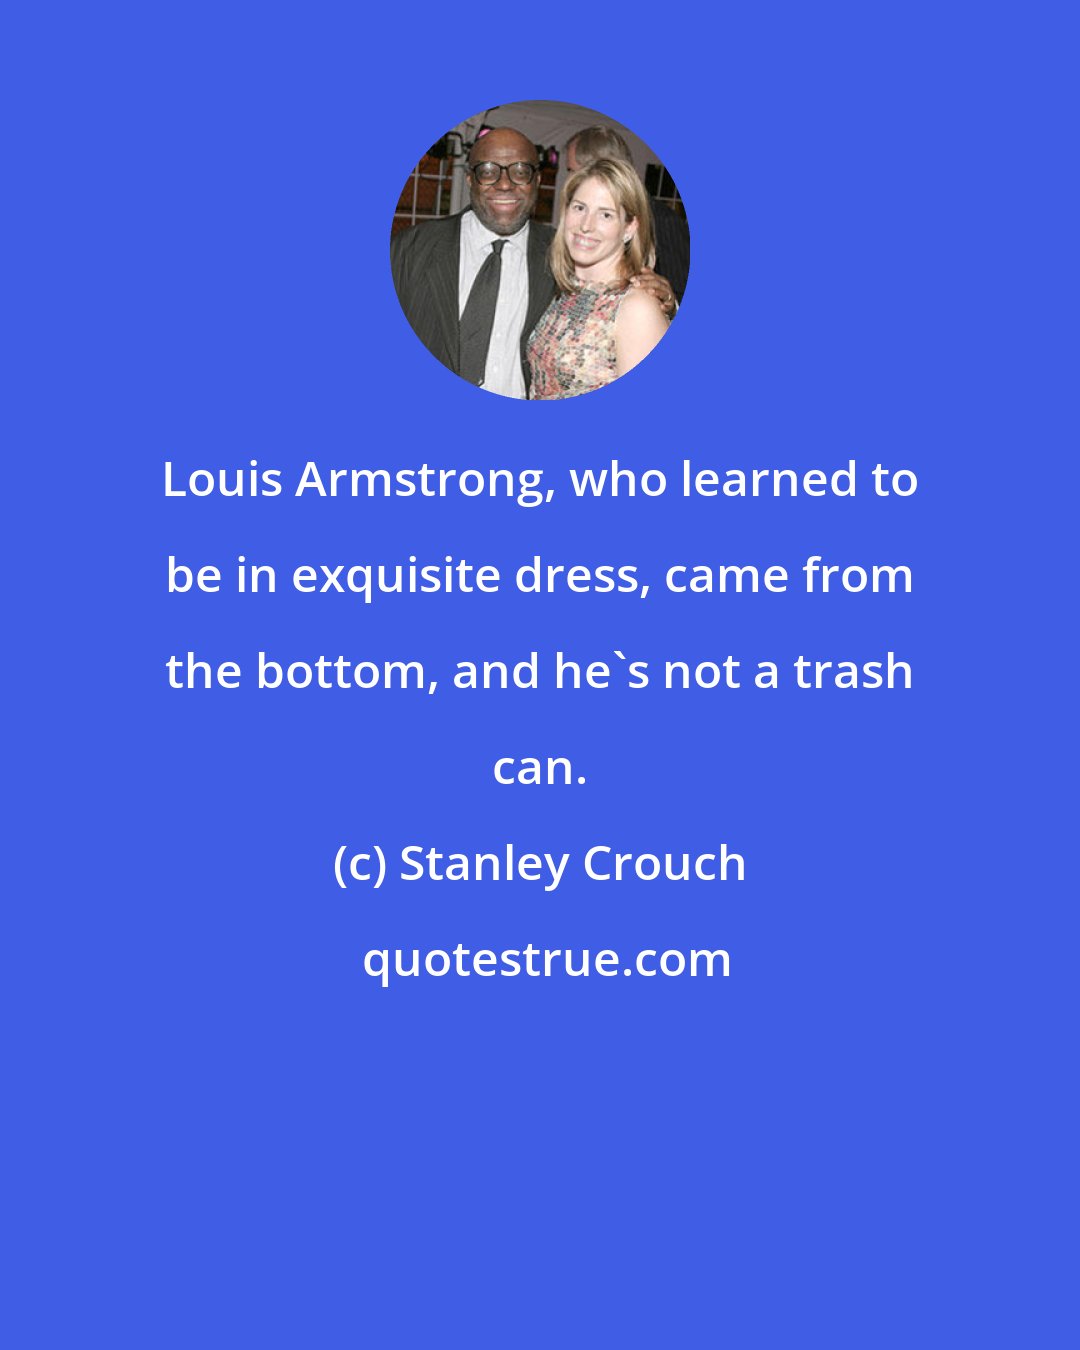 Stanley Crouch: Louis Armstrong, who learned to be in exquisite dress, came from the bottom, and he's not a trash can.